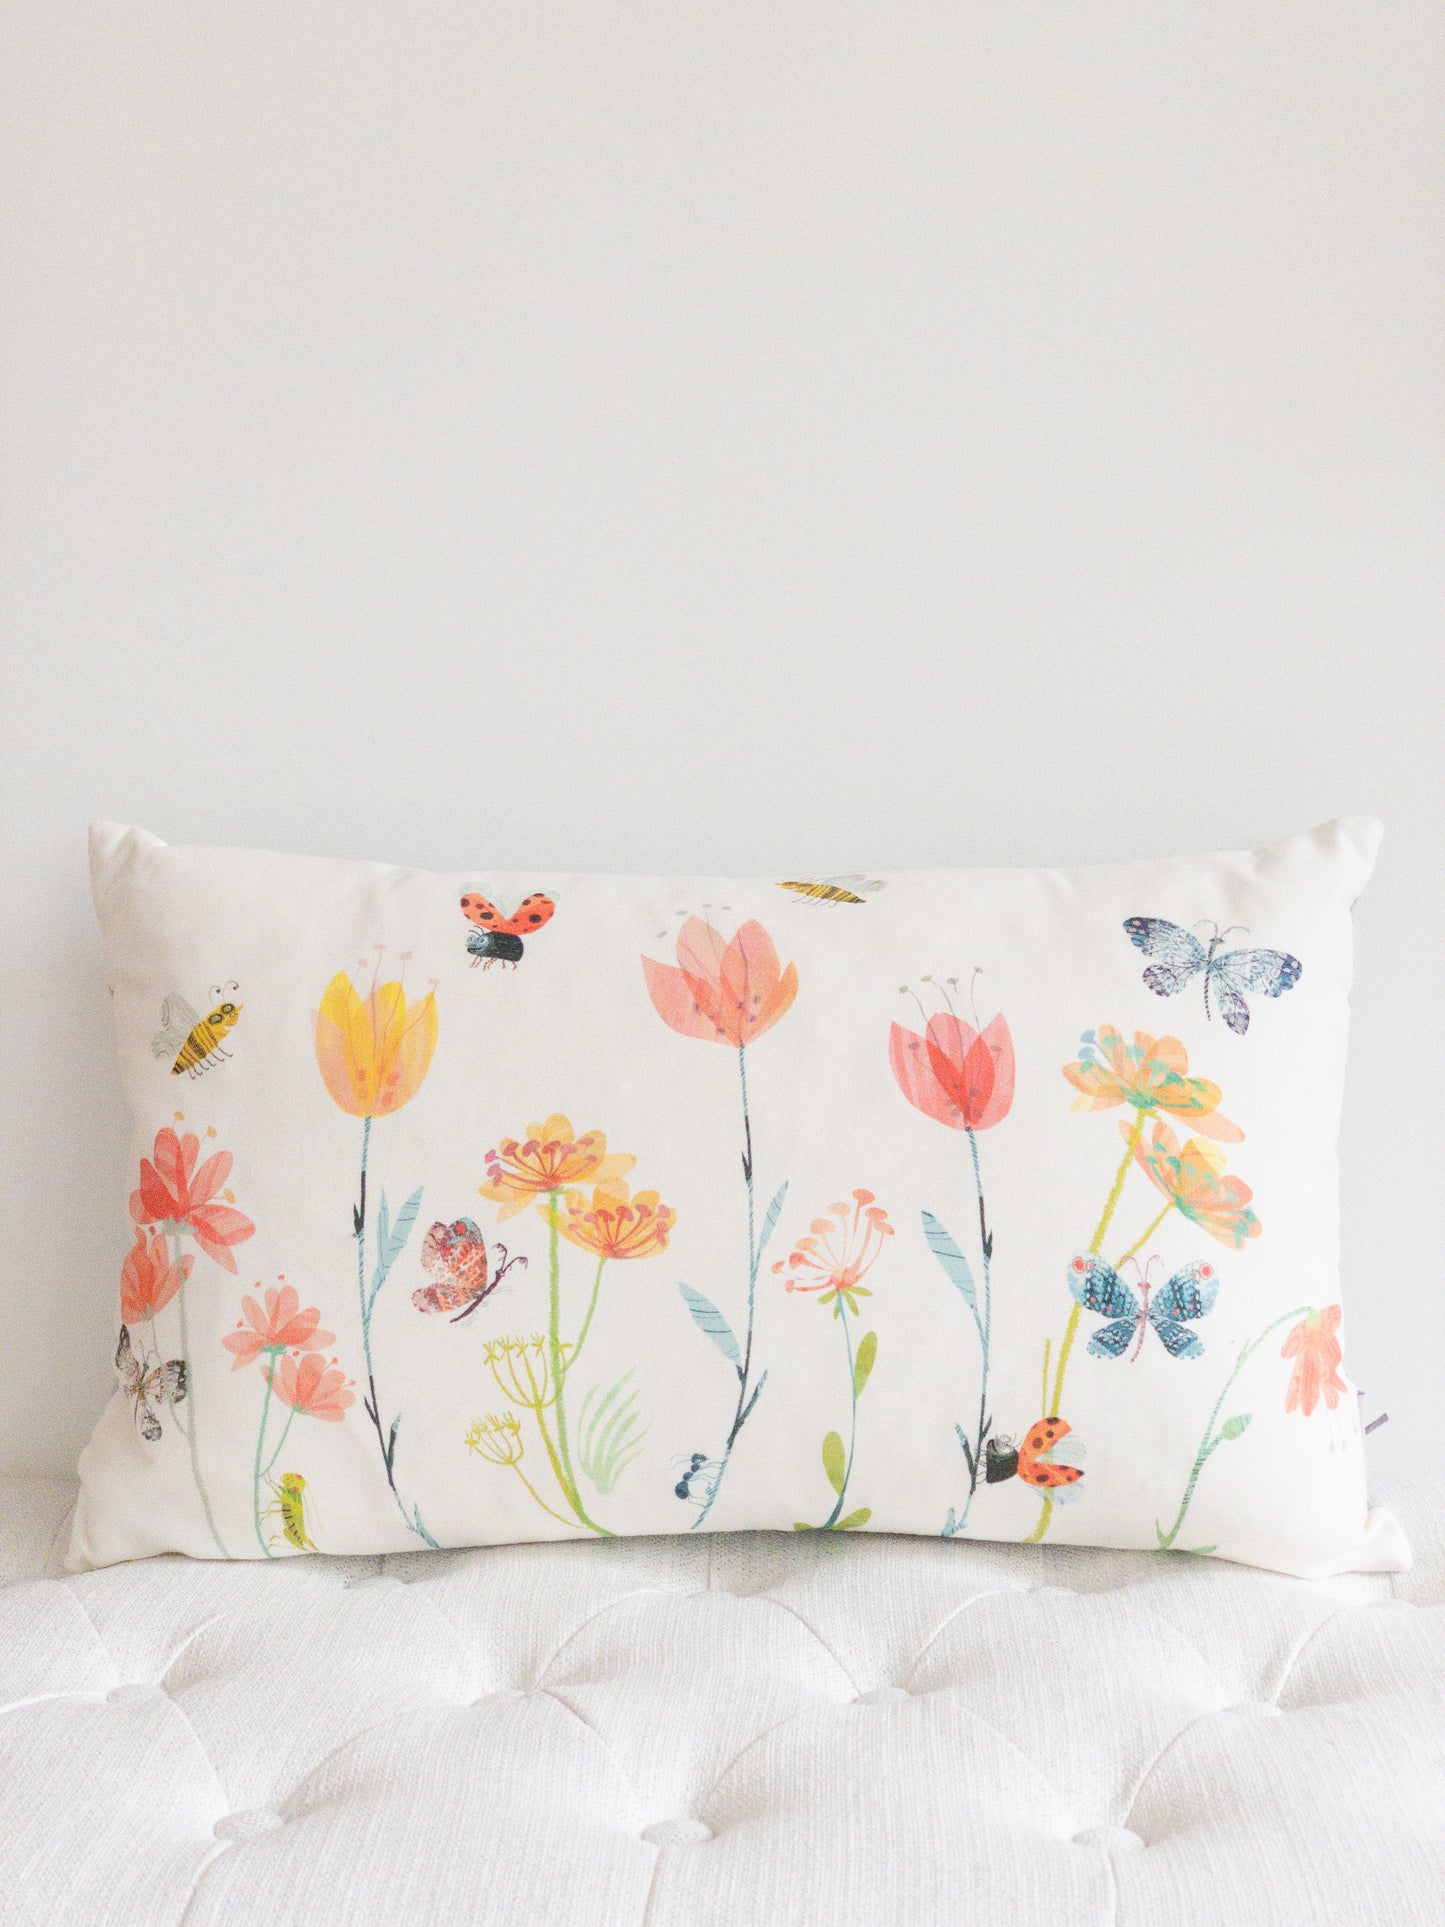 White lumbar designer pillow with insects and flower motif.  Spring decor throw pillow.